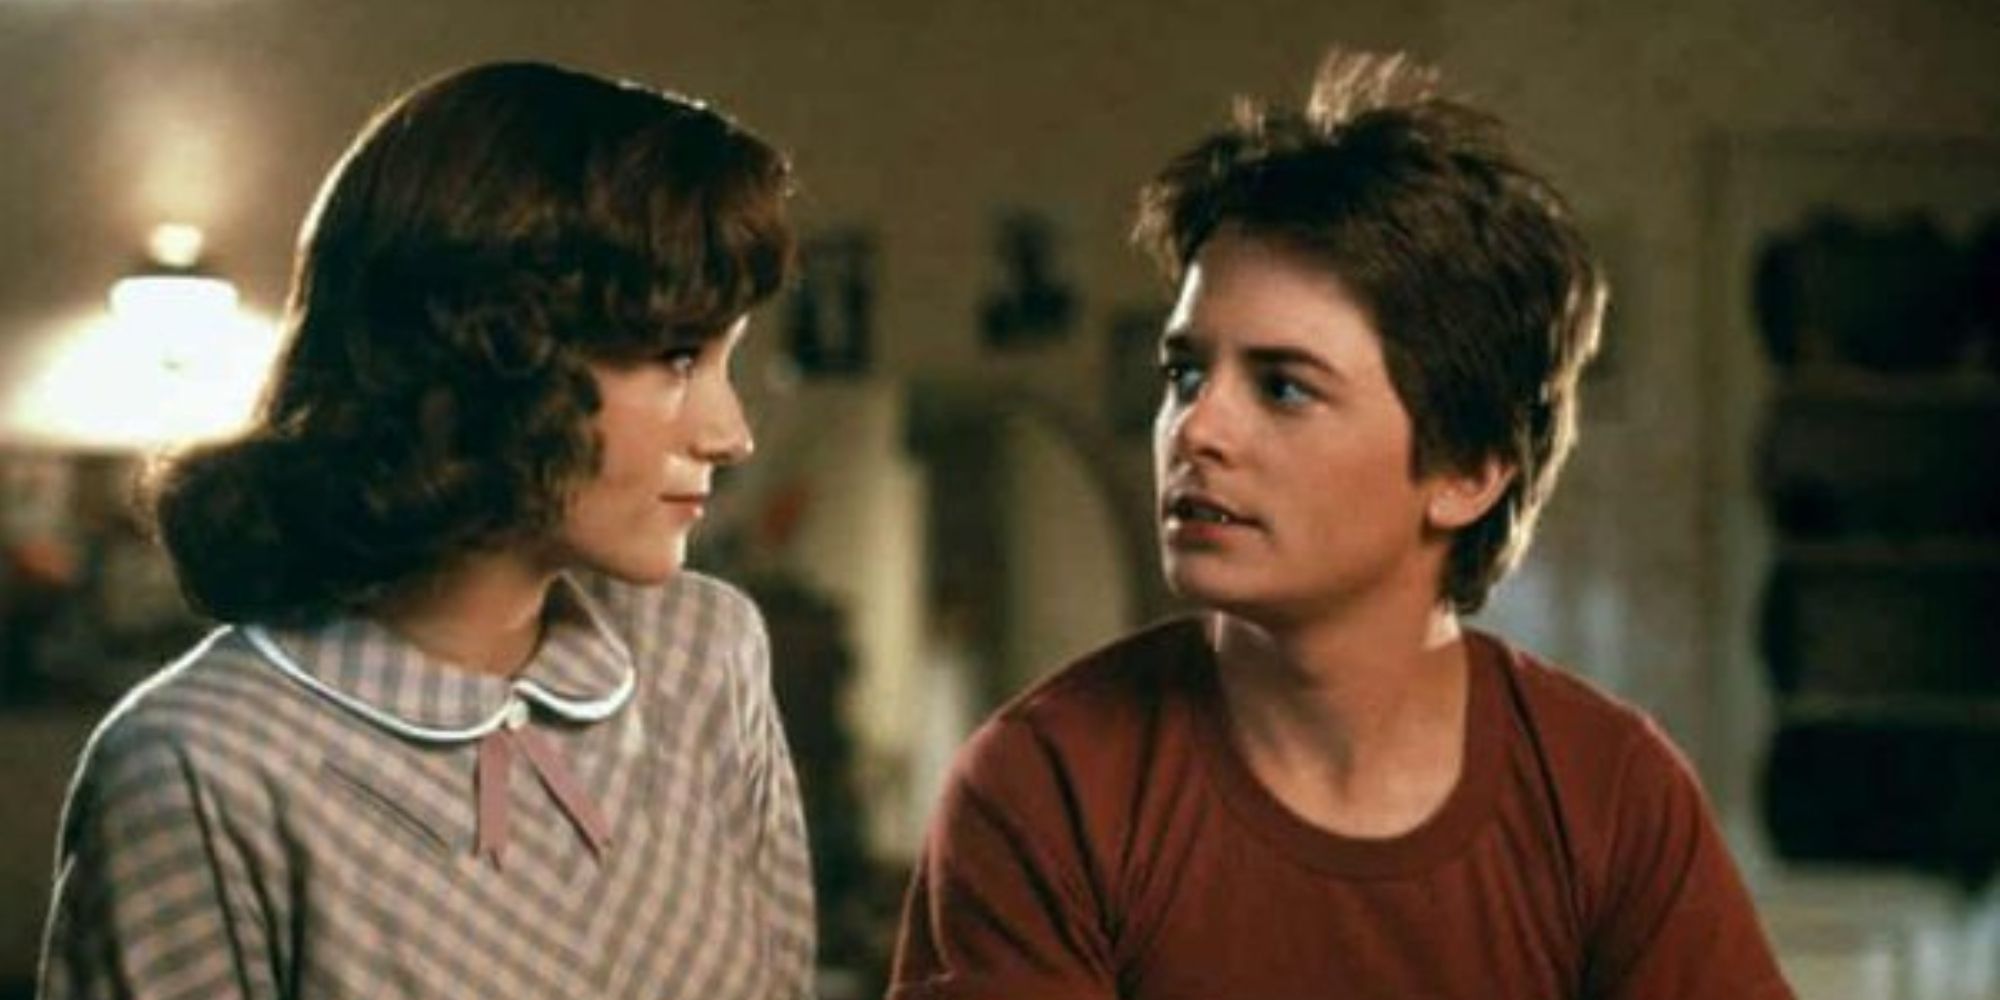 Lorraine (Lea Thompson) and Marty (Michael J. Fox) in Back to the Future